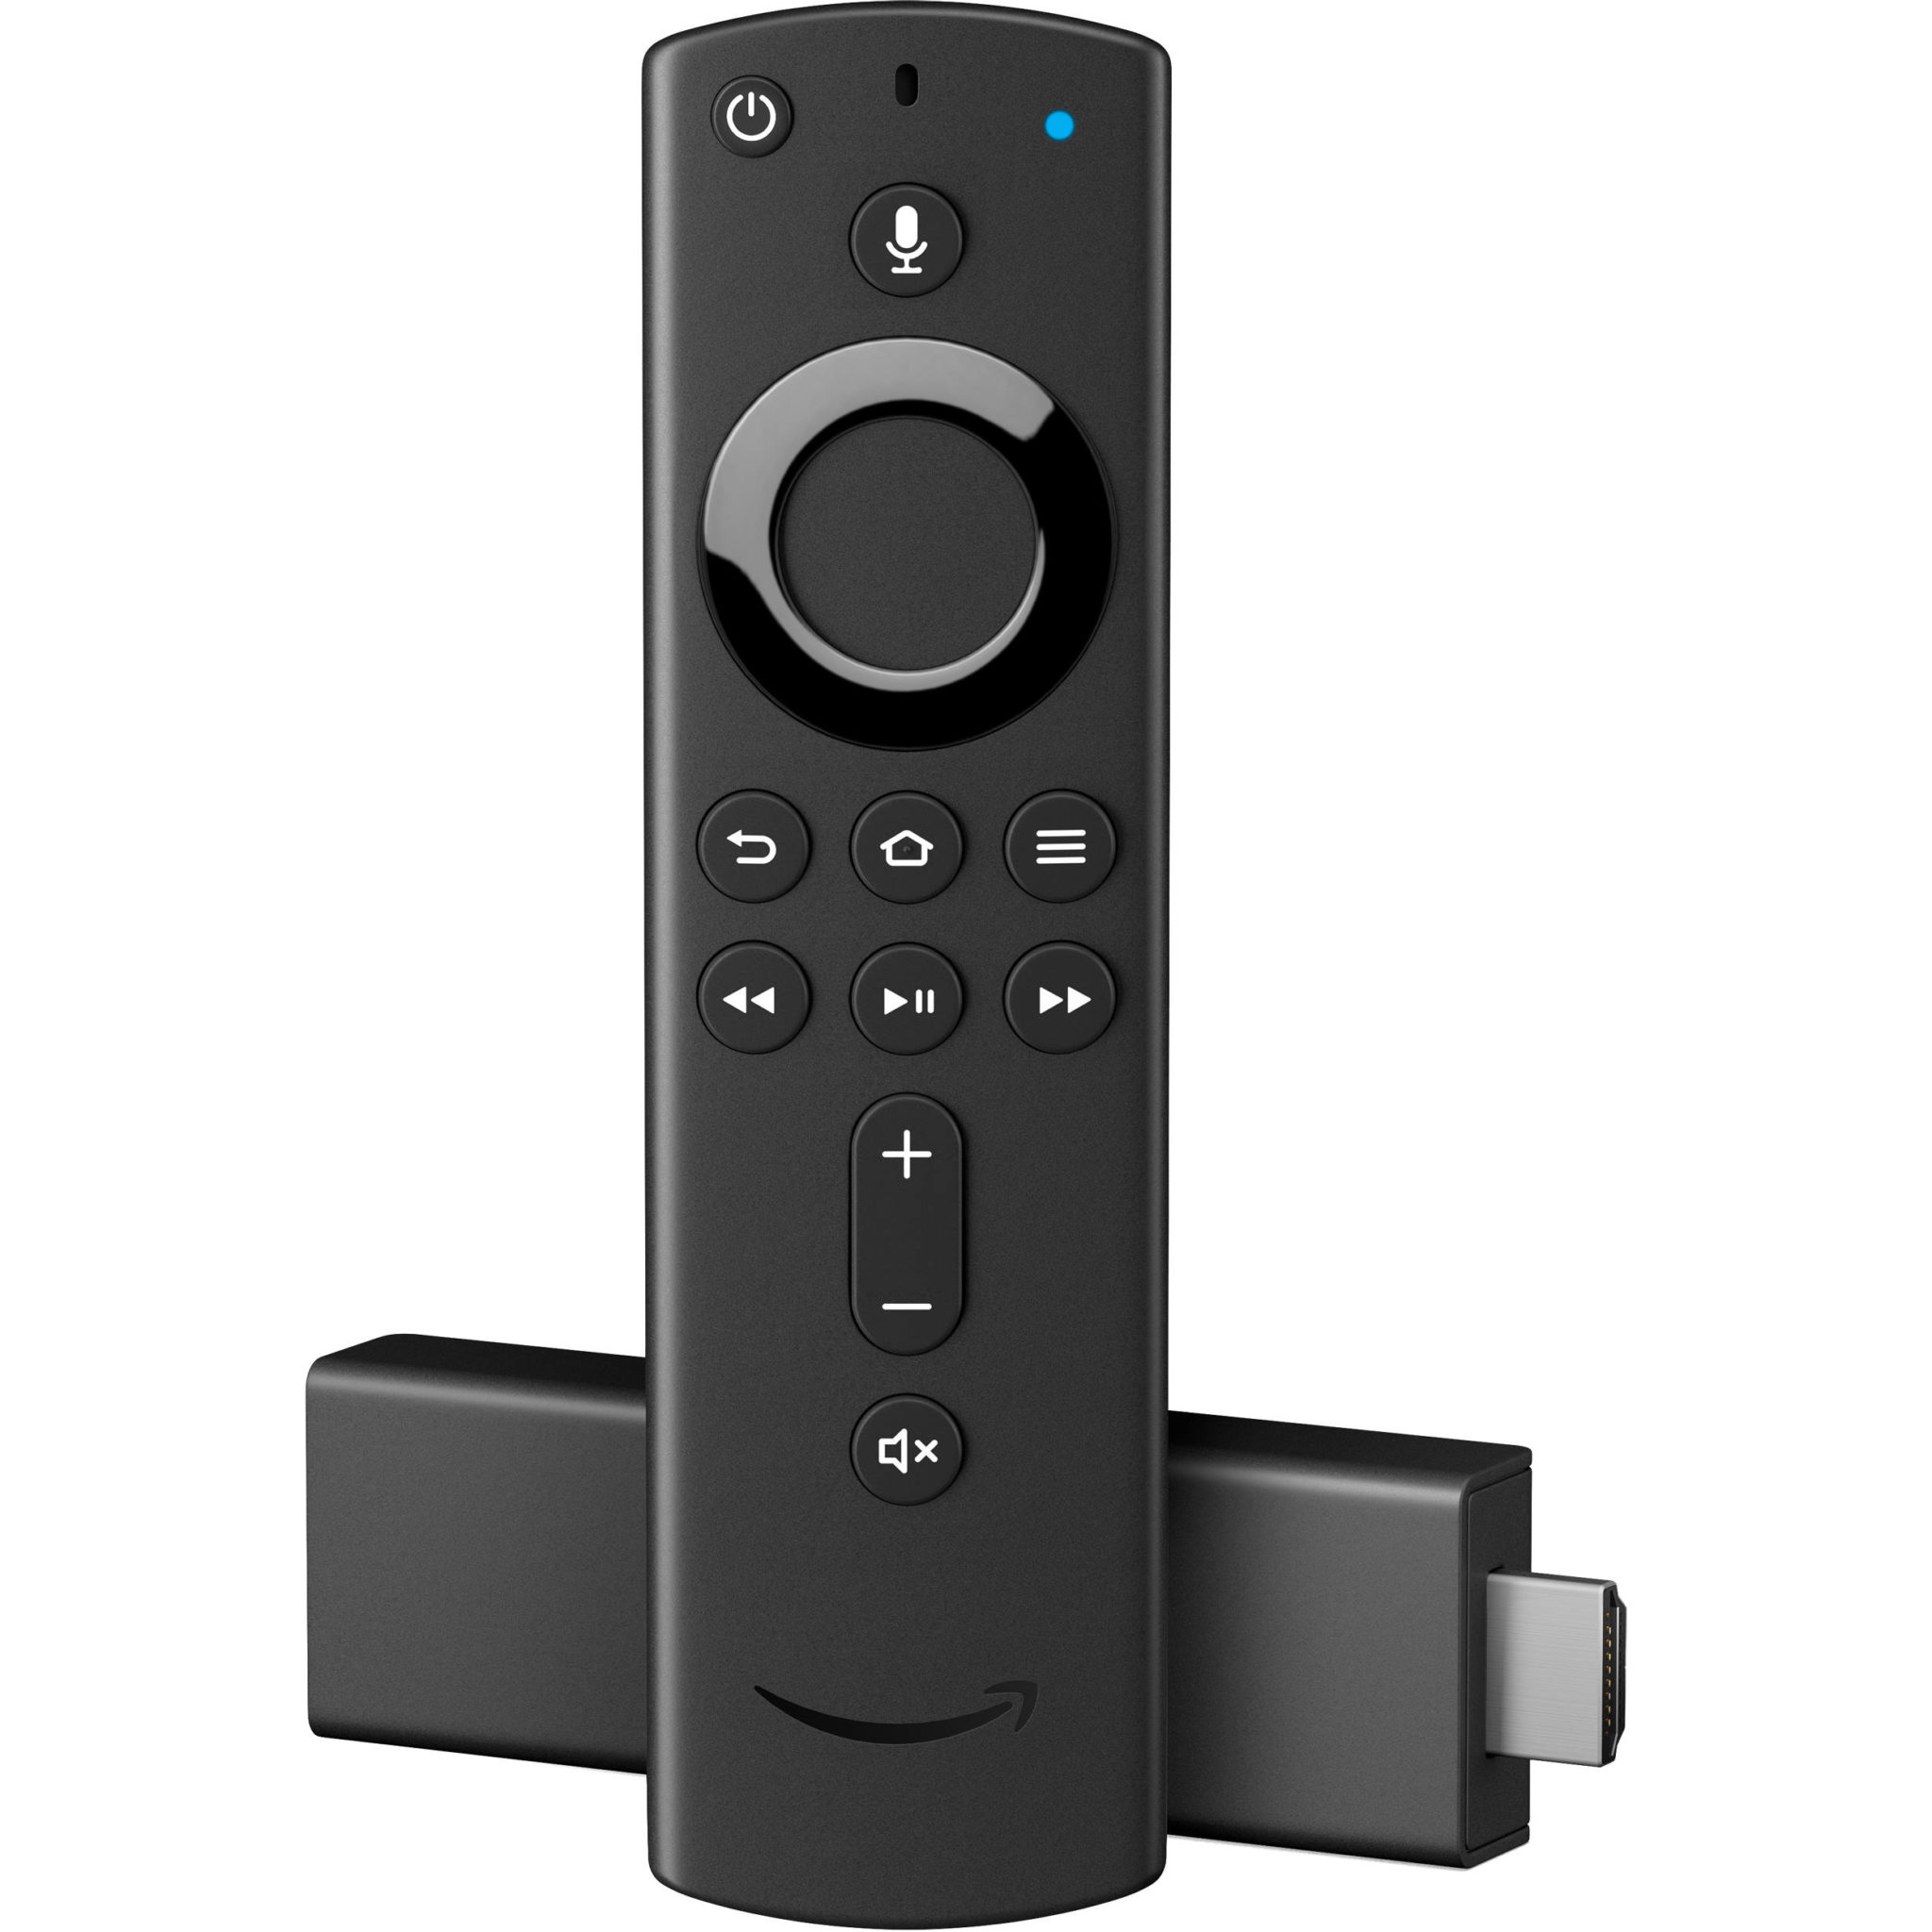 Sling TV is Offering a Free Amazon Fire Stick When You Prepay